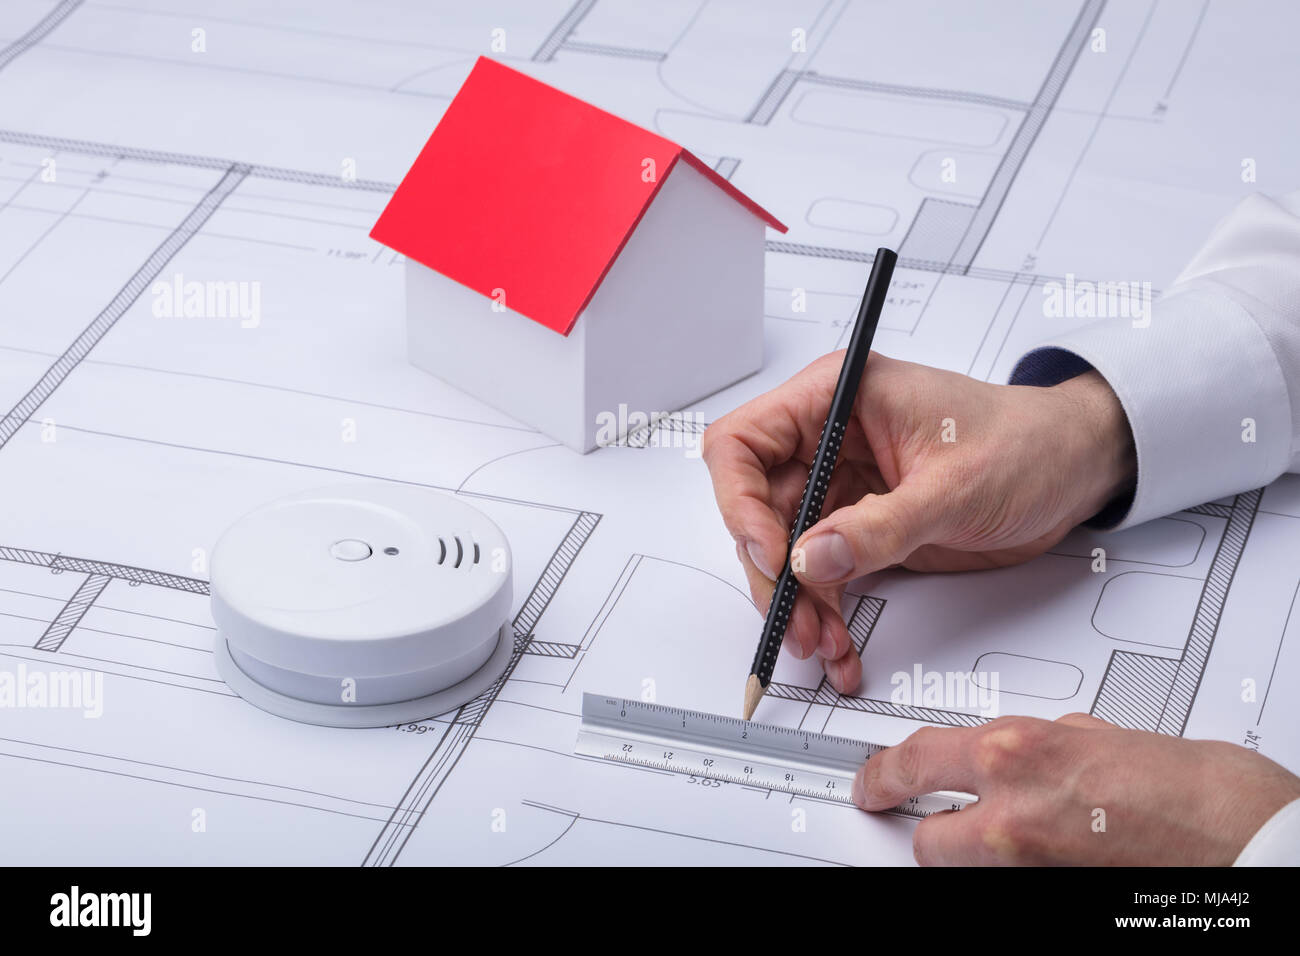 Architecture Drawing Blueprint Near Smoke Detector And House Model Stock Photo